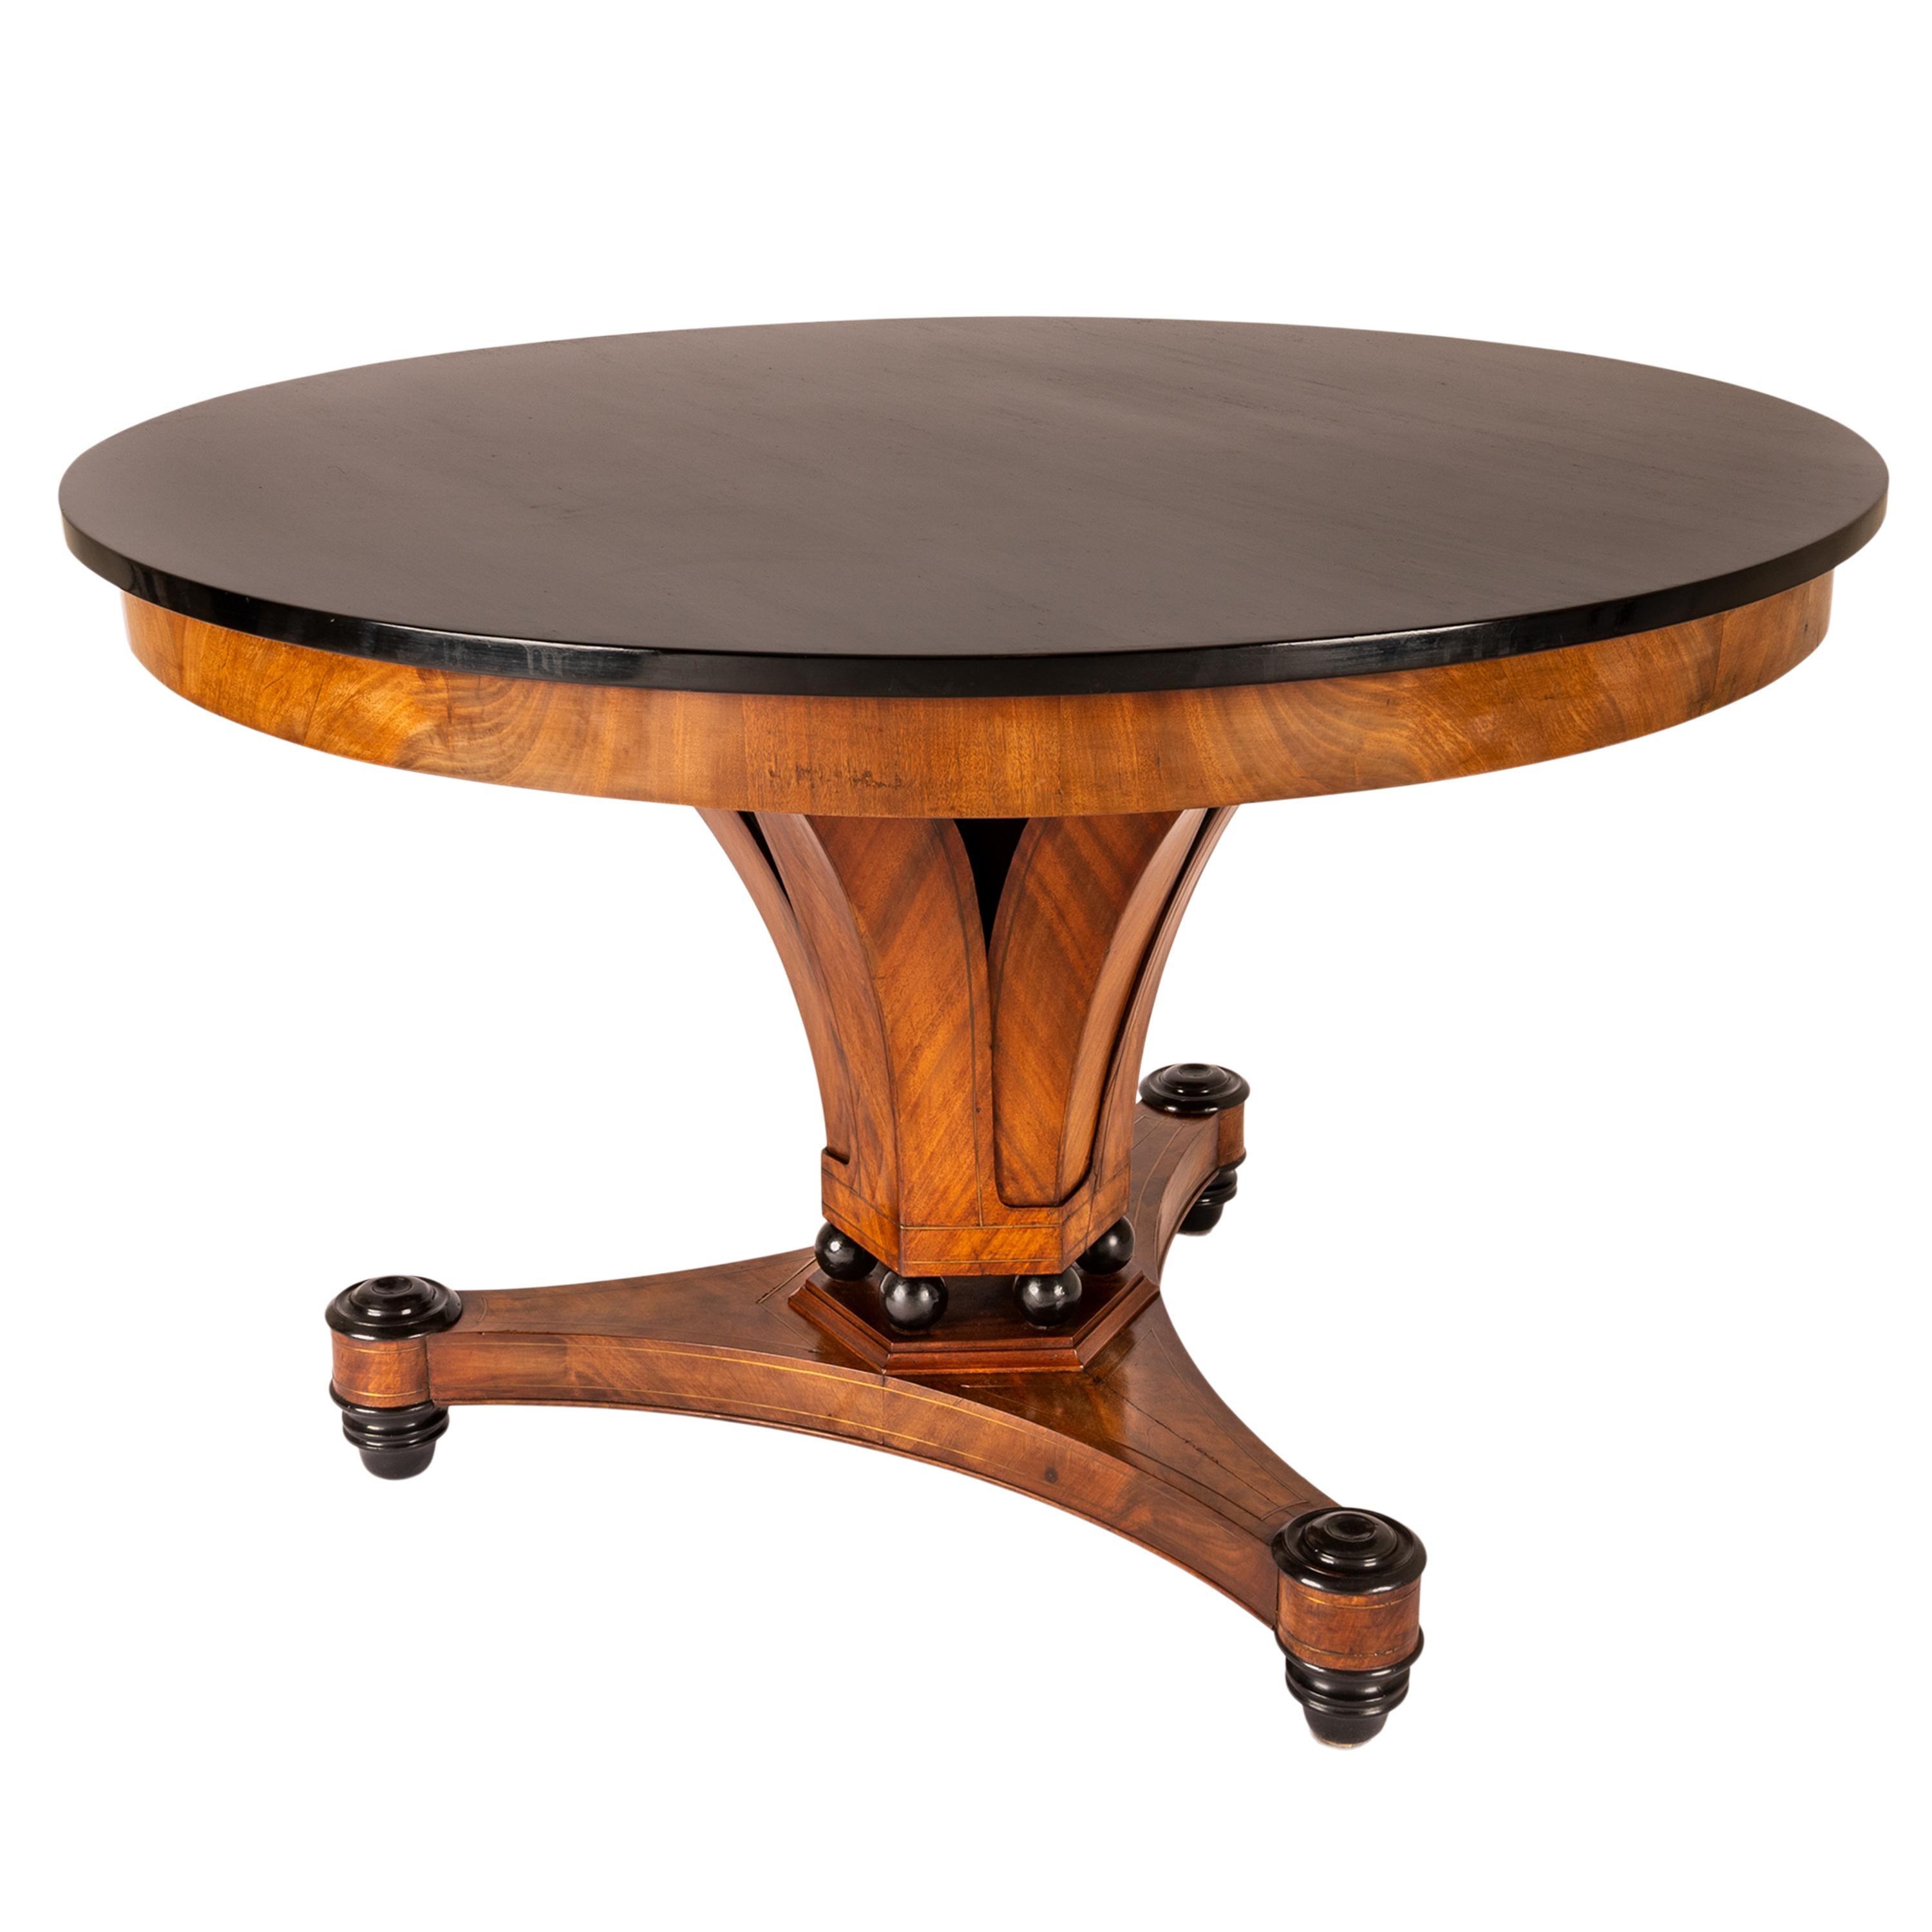 A fine antique Austrian Biedermeier dining or center table, circa 1820.
This very elegant table made from blond walnut and having an ebonized top and ebonized accents, the base with brass line inlay. The circular ebonized top is raised on a flared